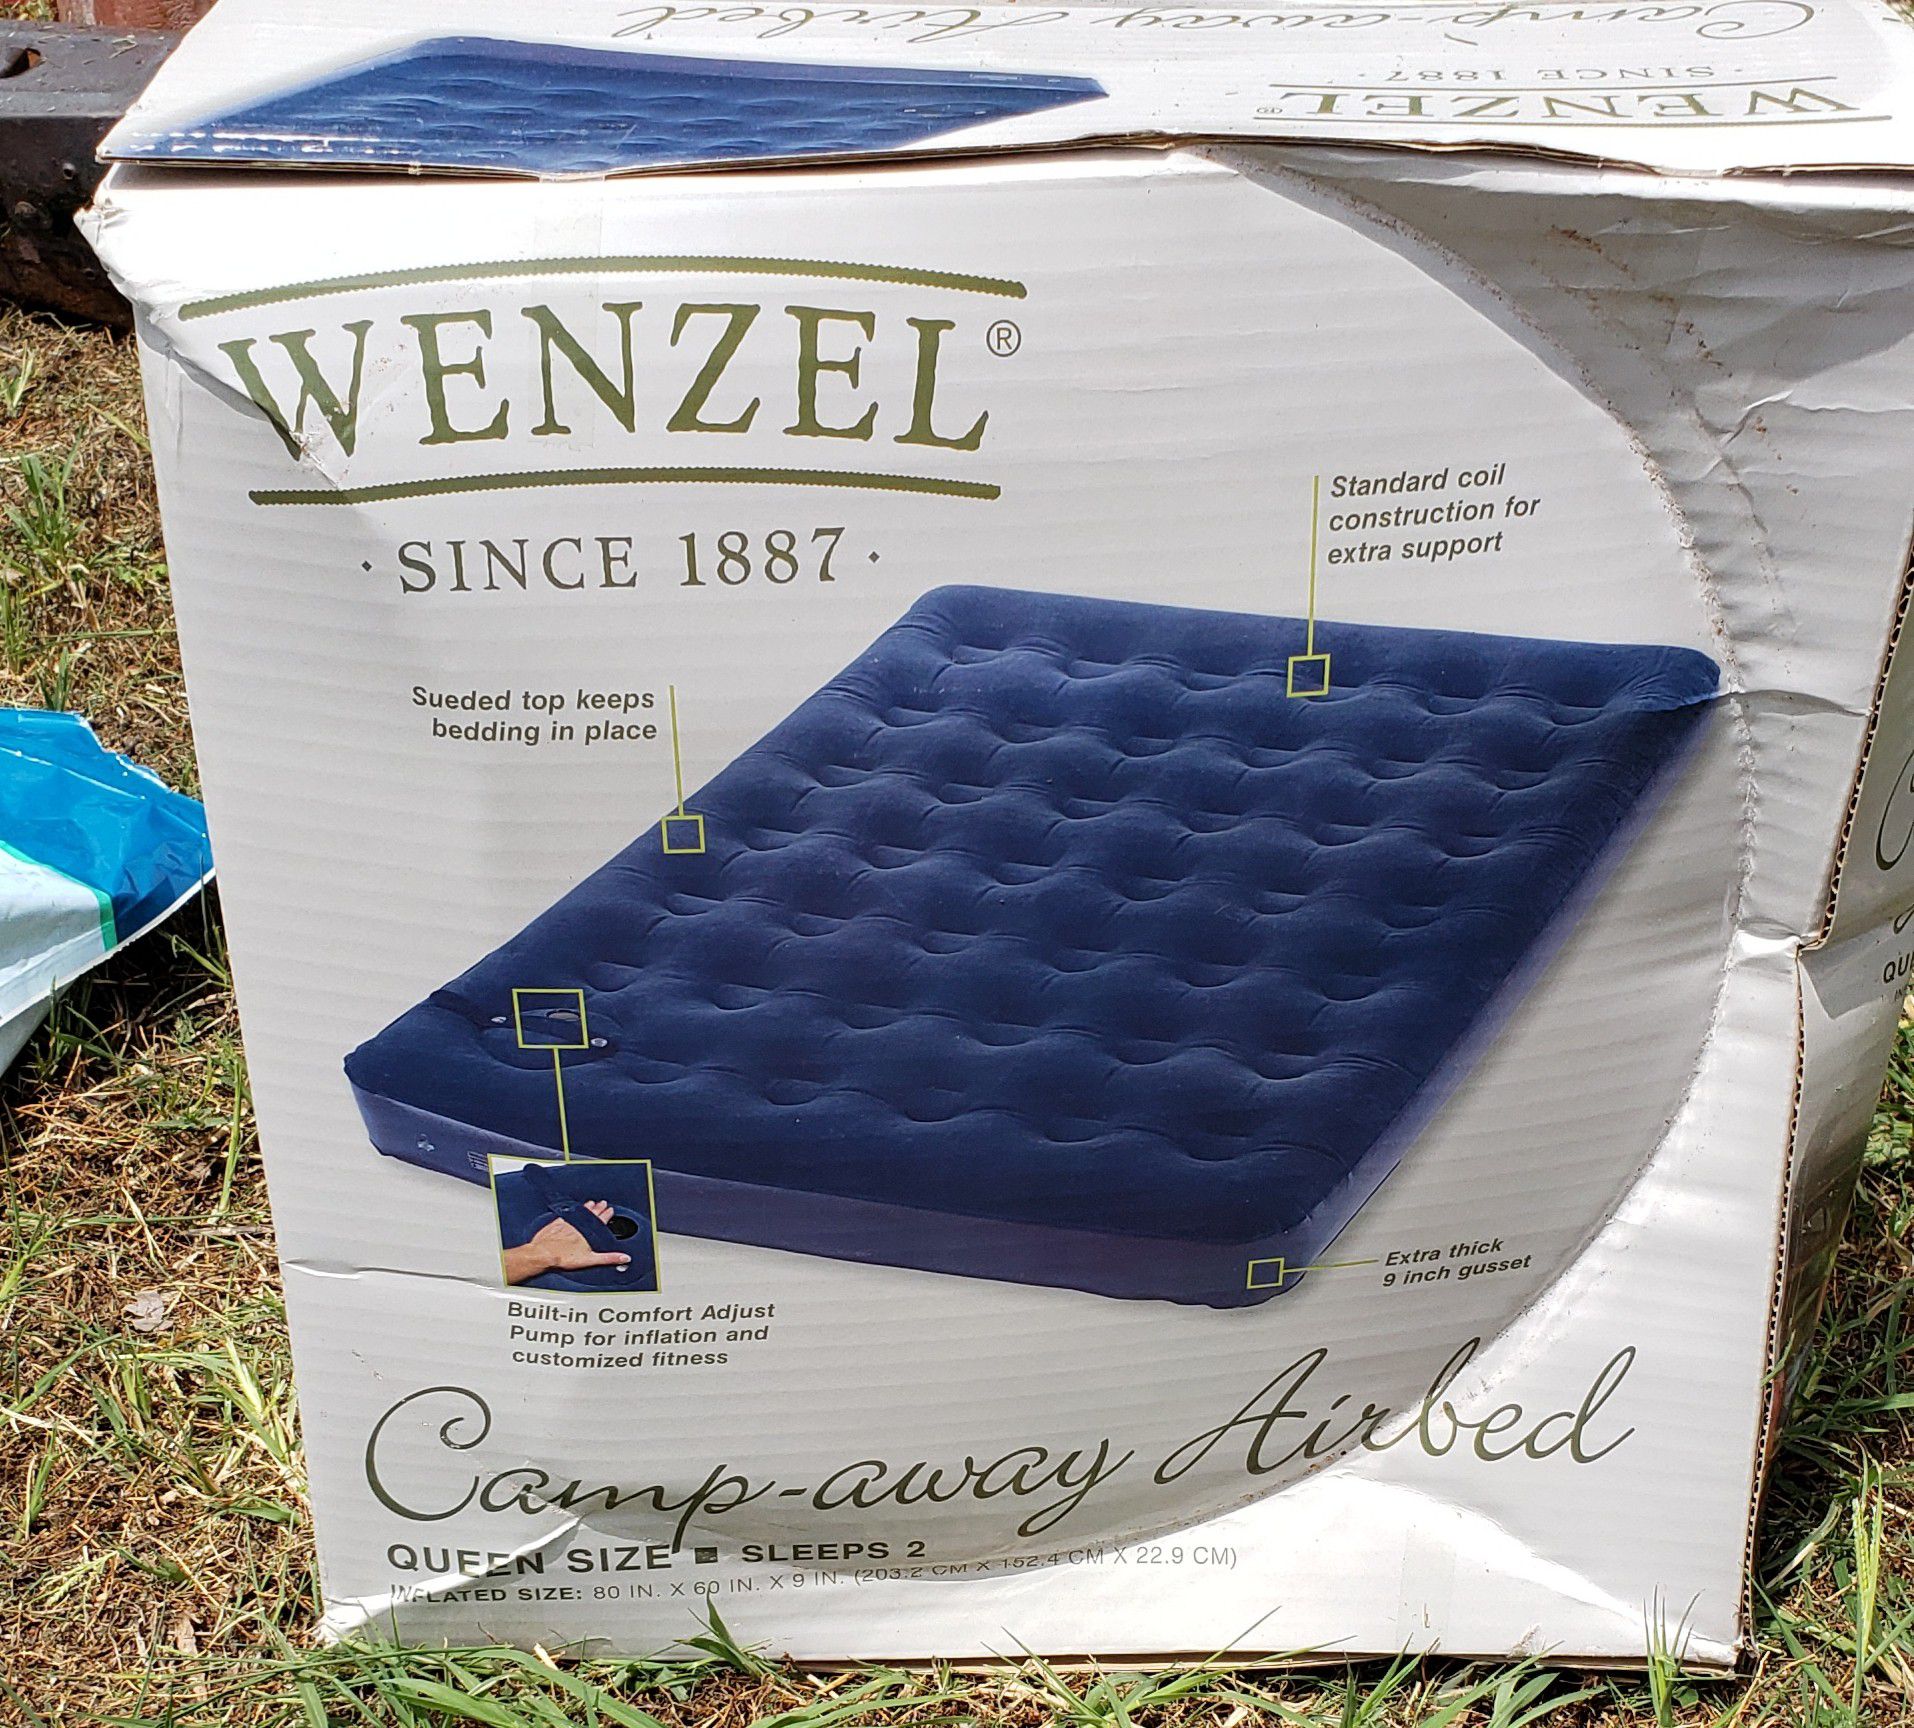 Wenzel Camping air mattress brand new in box